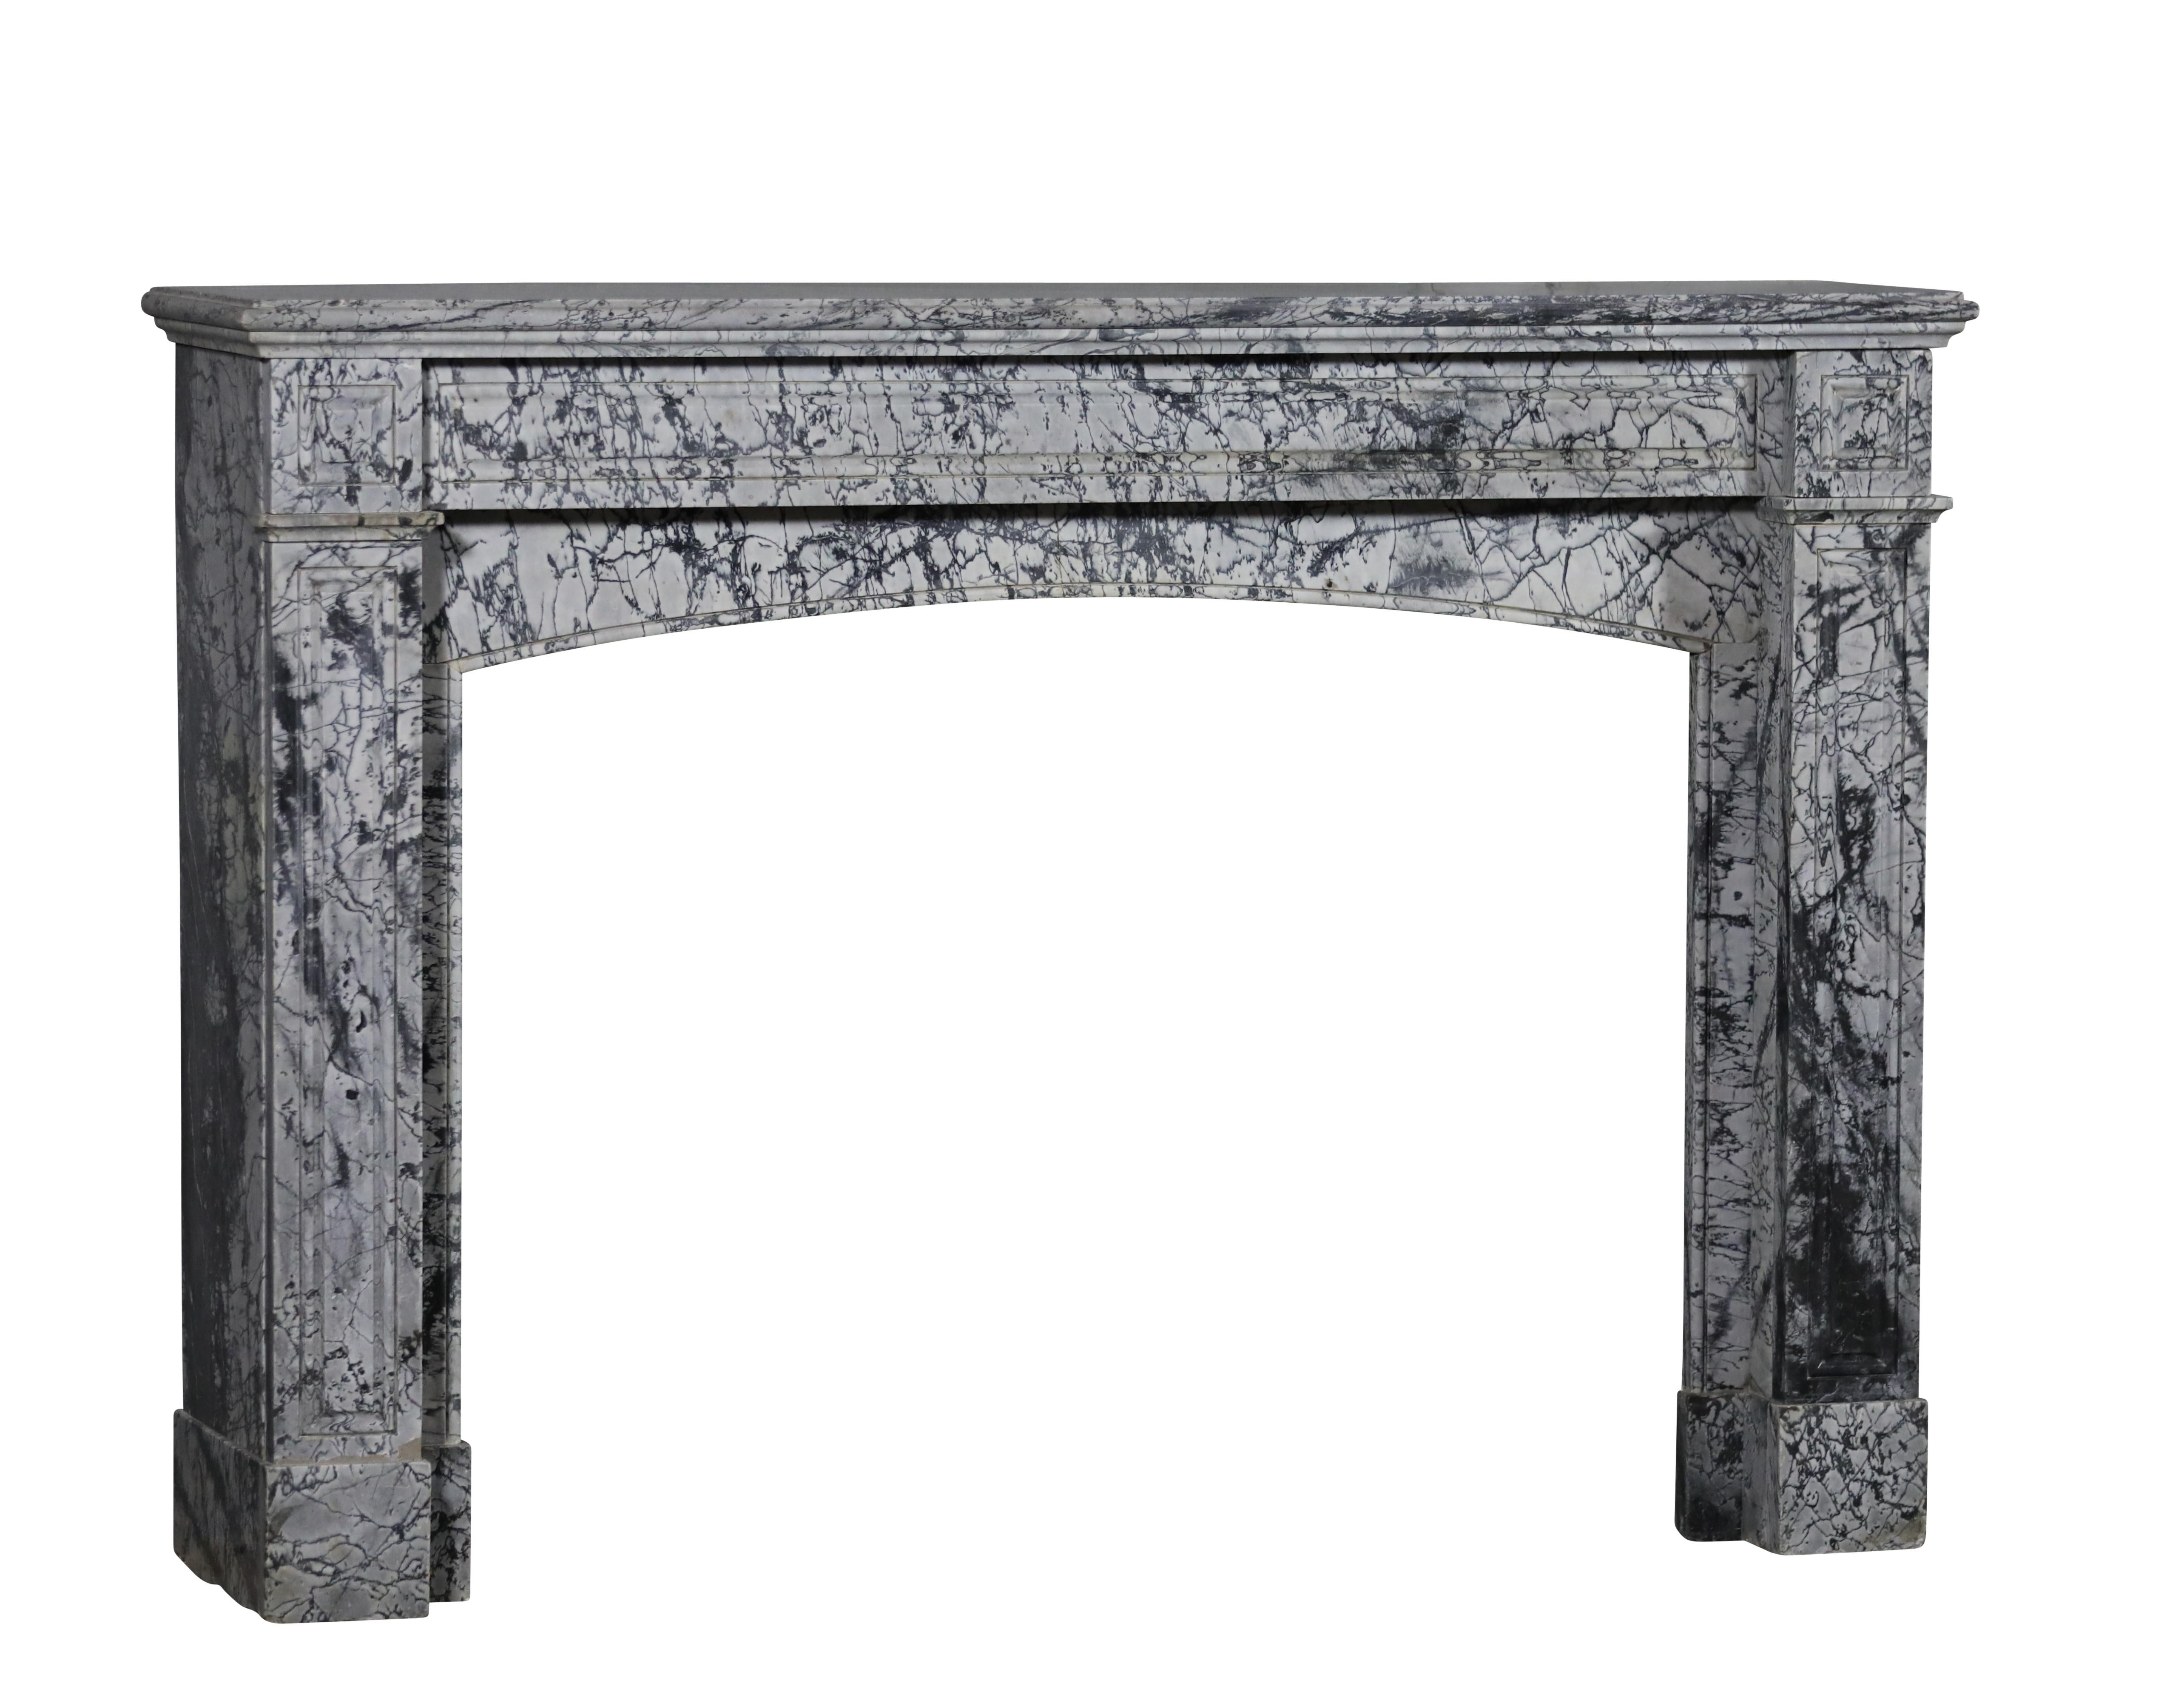 Belgian Bleu Turquin Marble Fireplace Surround In Great Condition For Timeless Design For Sale